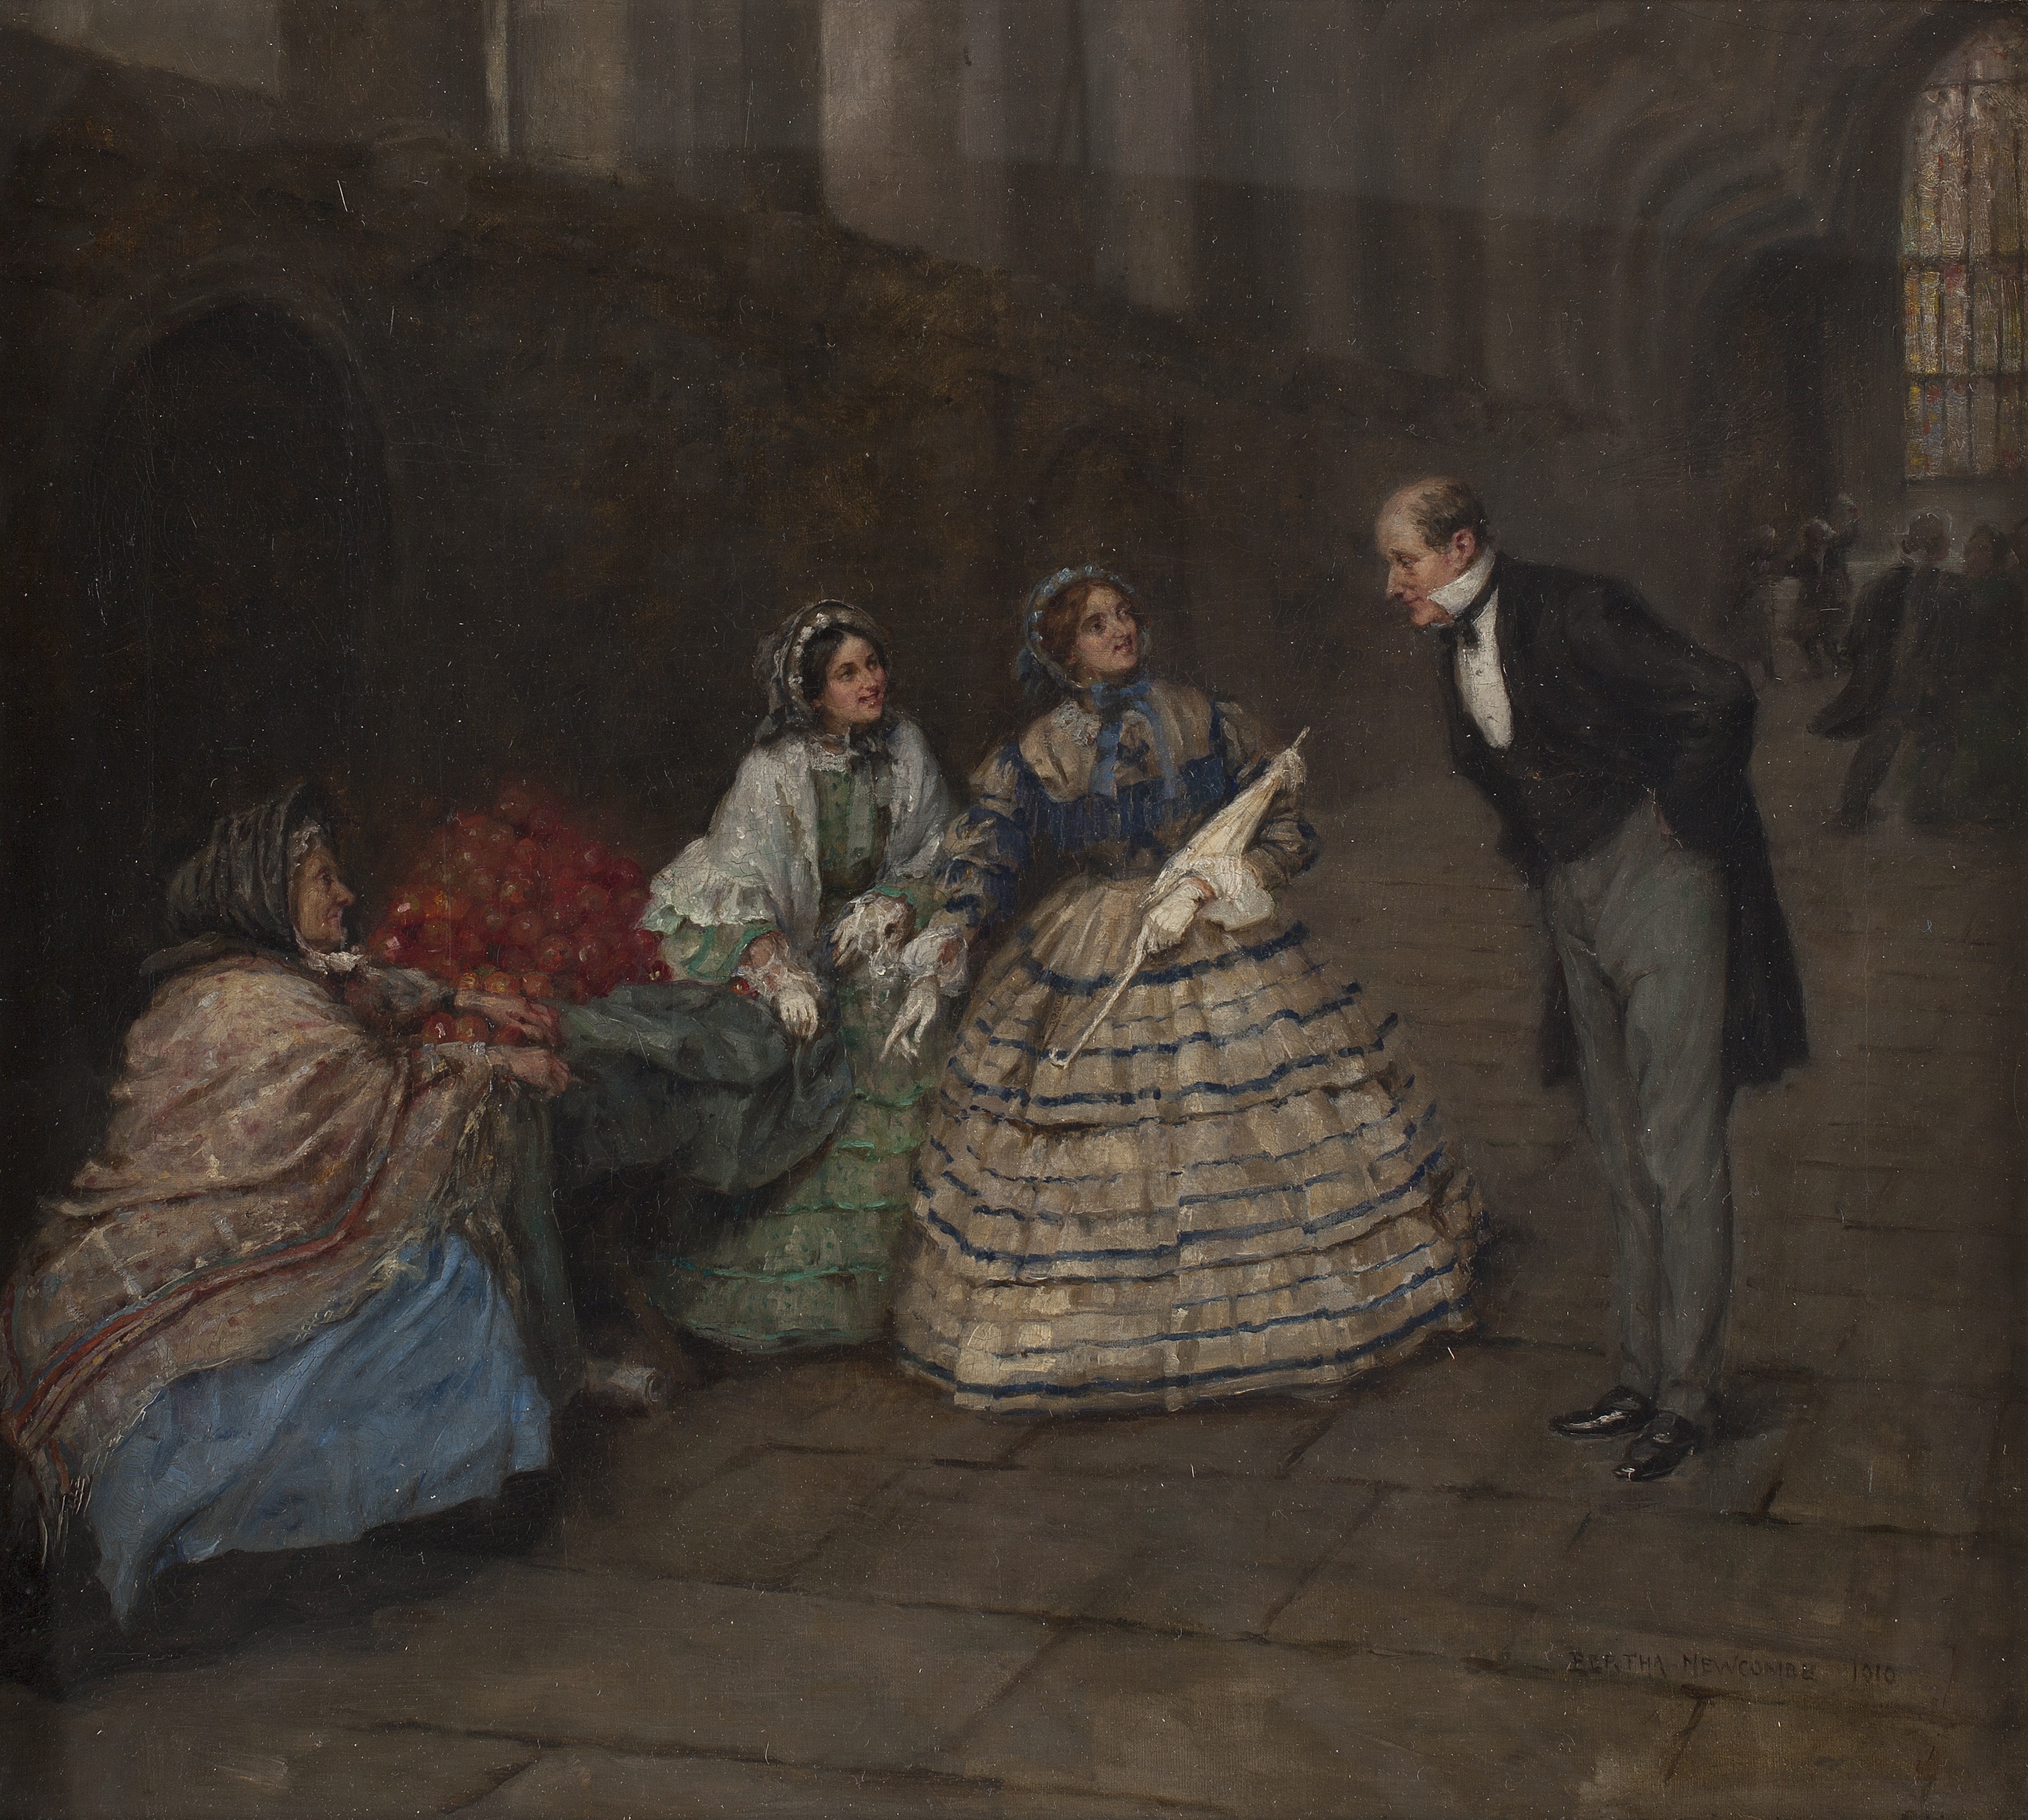 Bertha Newcombe's painting of petition